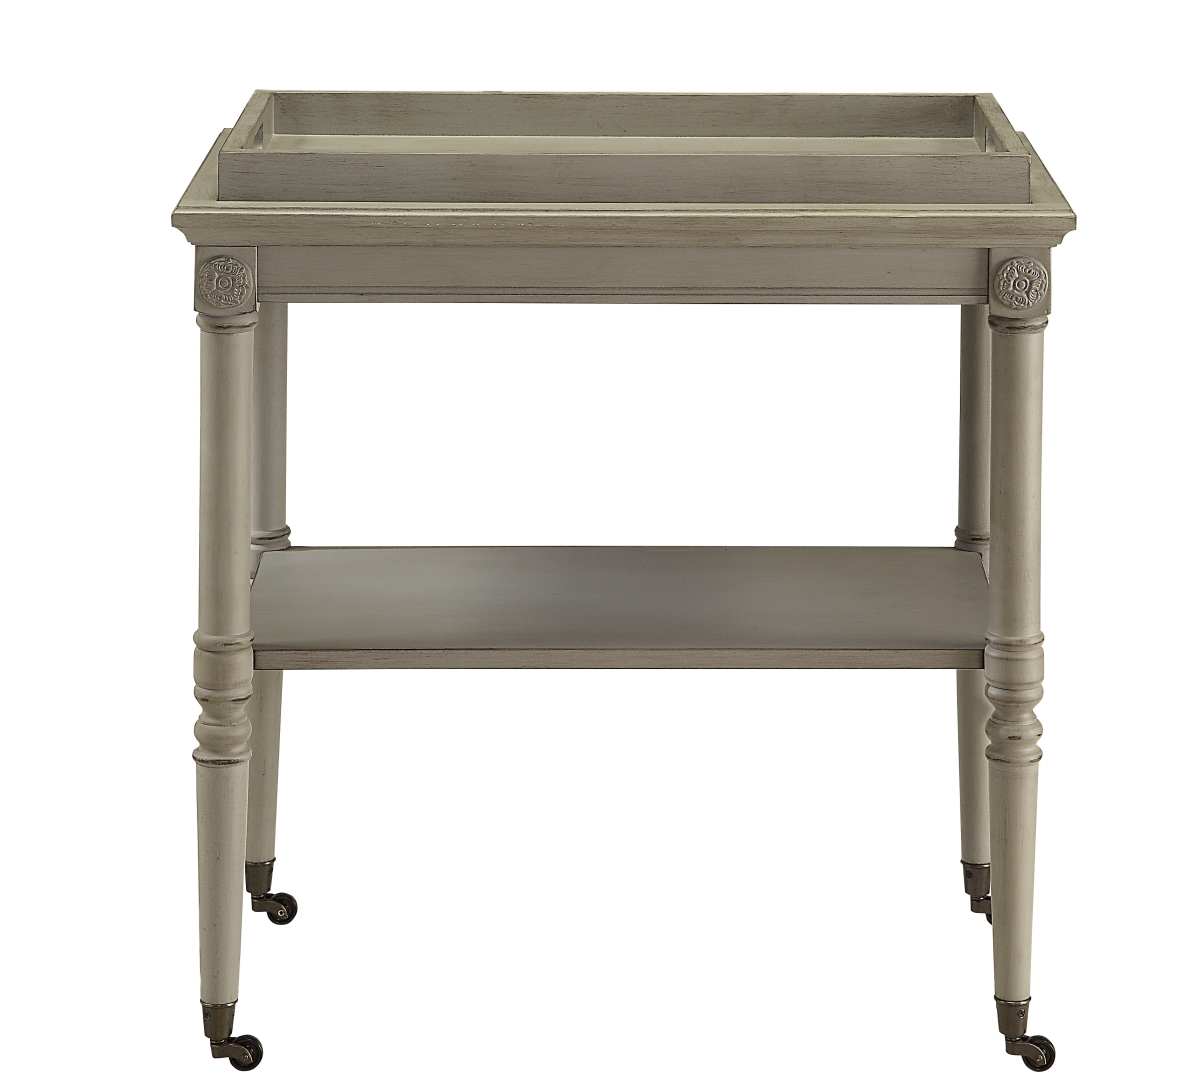 Picture of Home Roots Furniture 286341 32 x 30 x 18 in. MDF & Solid Wood Leg Tray Tabl - Antique Slate